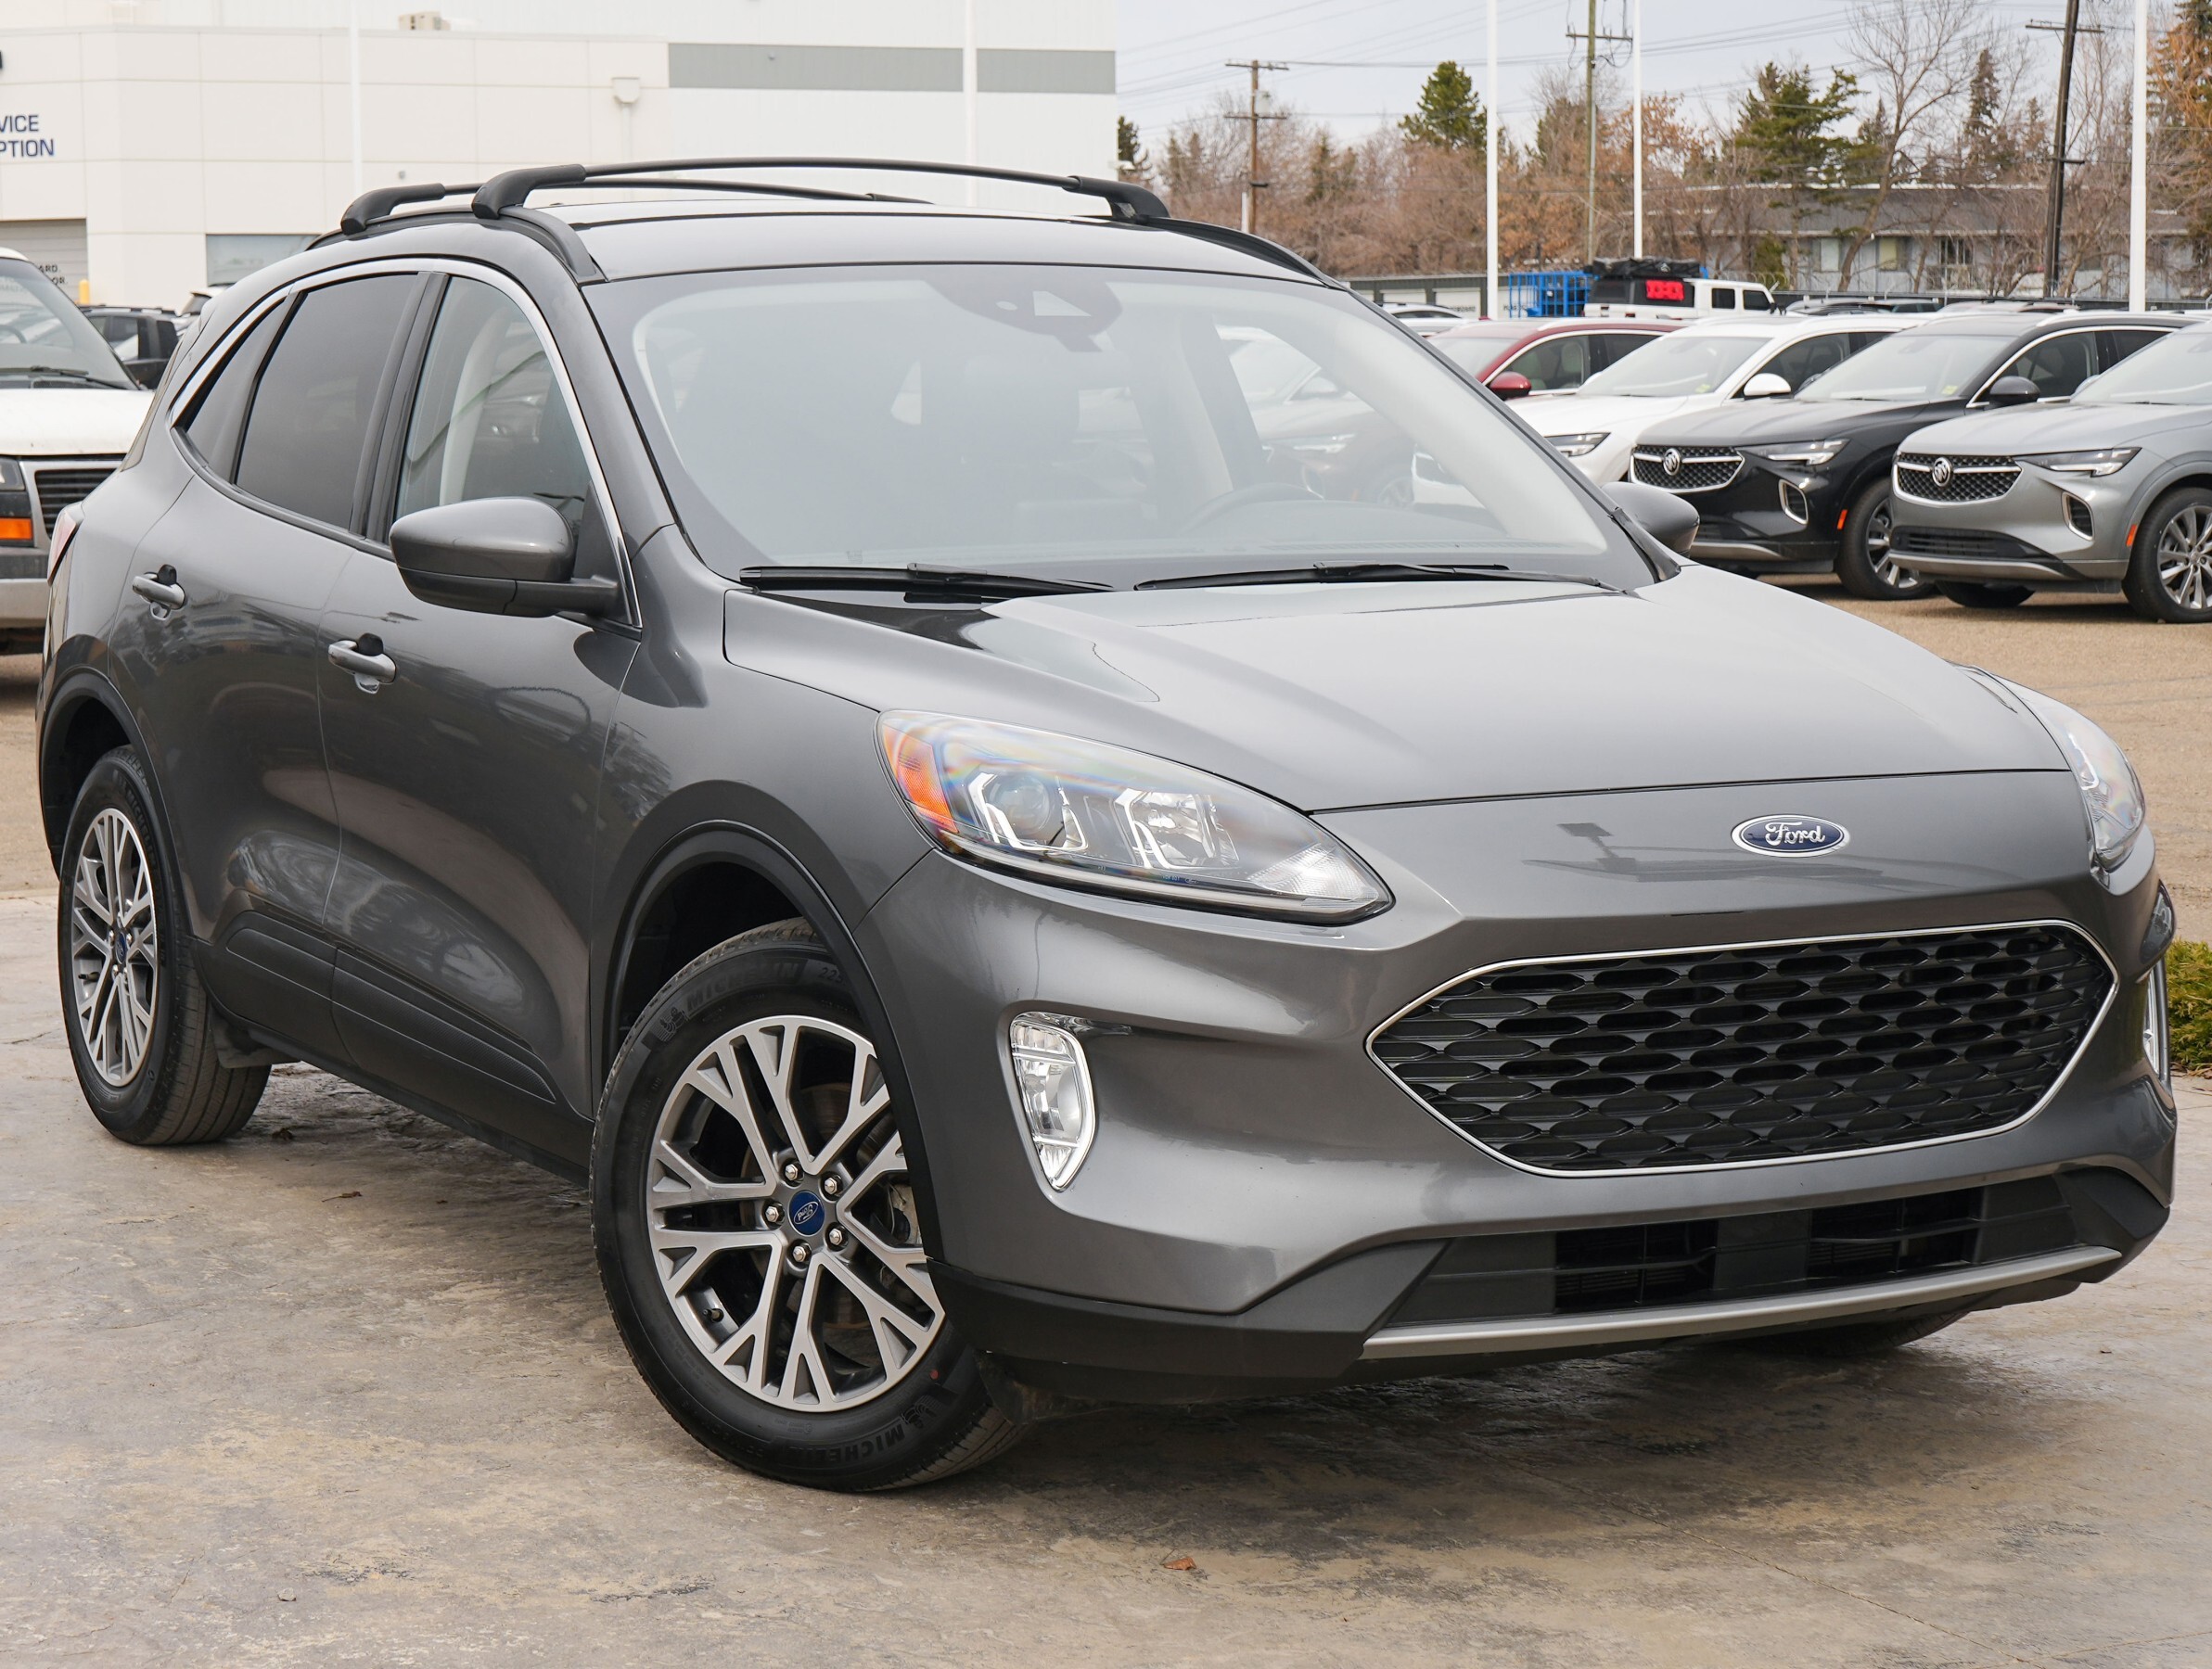 2021 Ford Escape SEL Hybrid, Leather, Nav, AWD, Tech Package